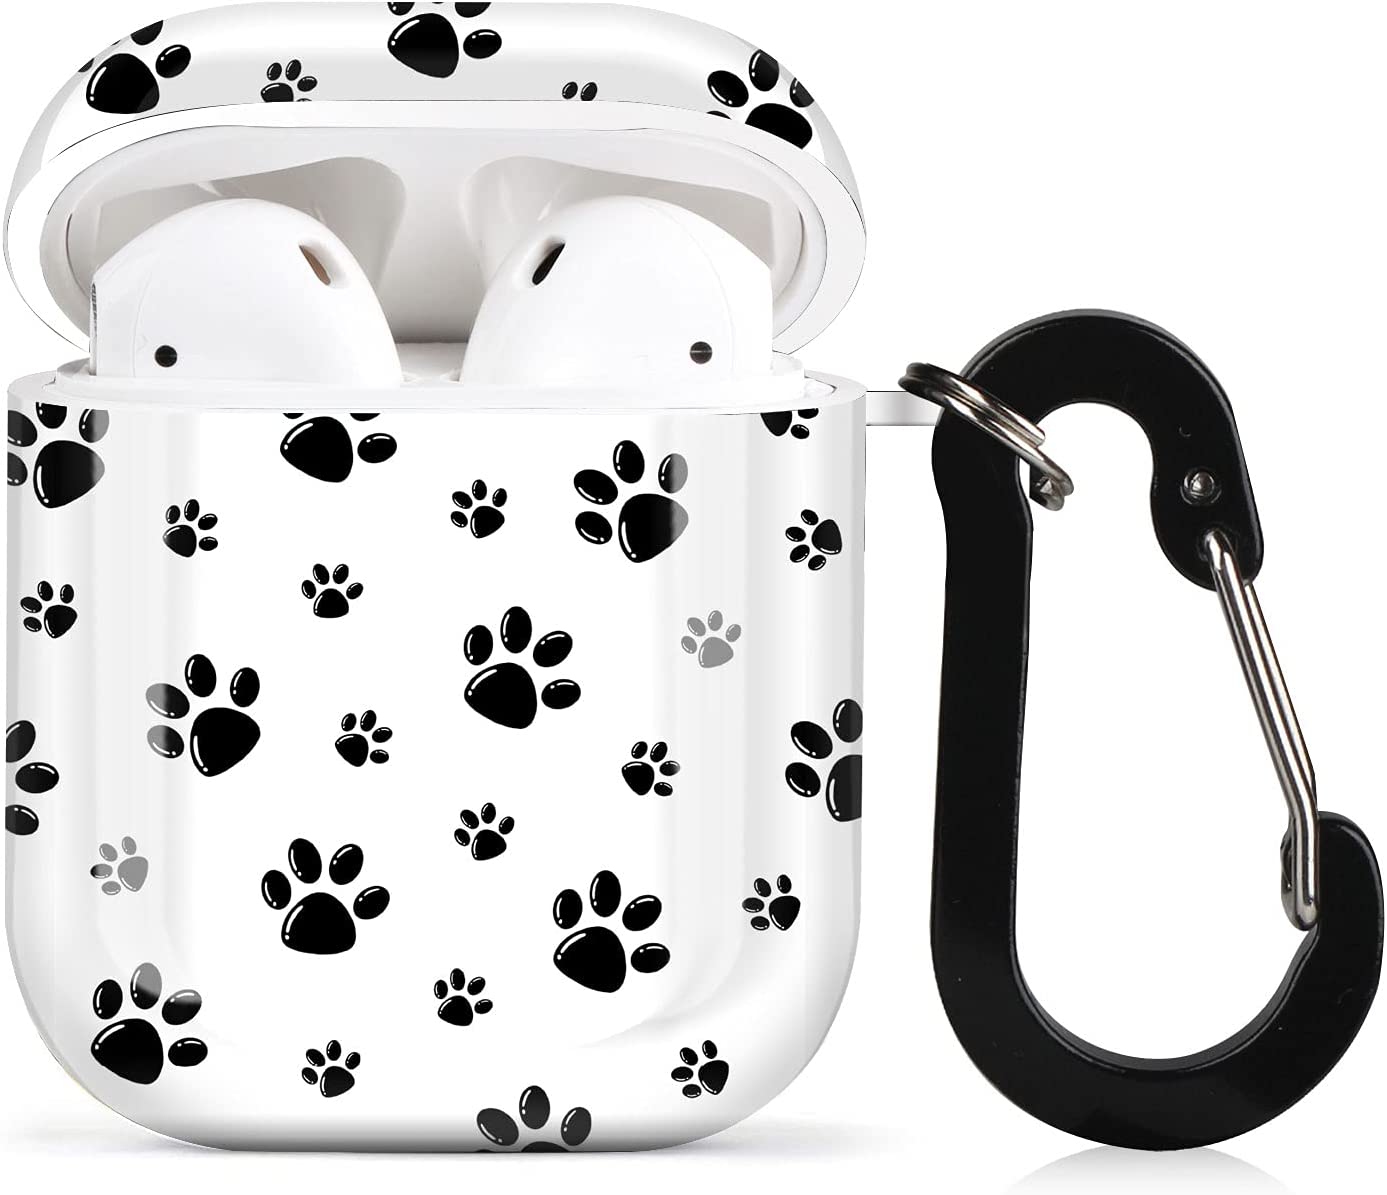 Furry Dog Earbud Case Cover - Compatible with Apple AirPods pro®